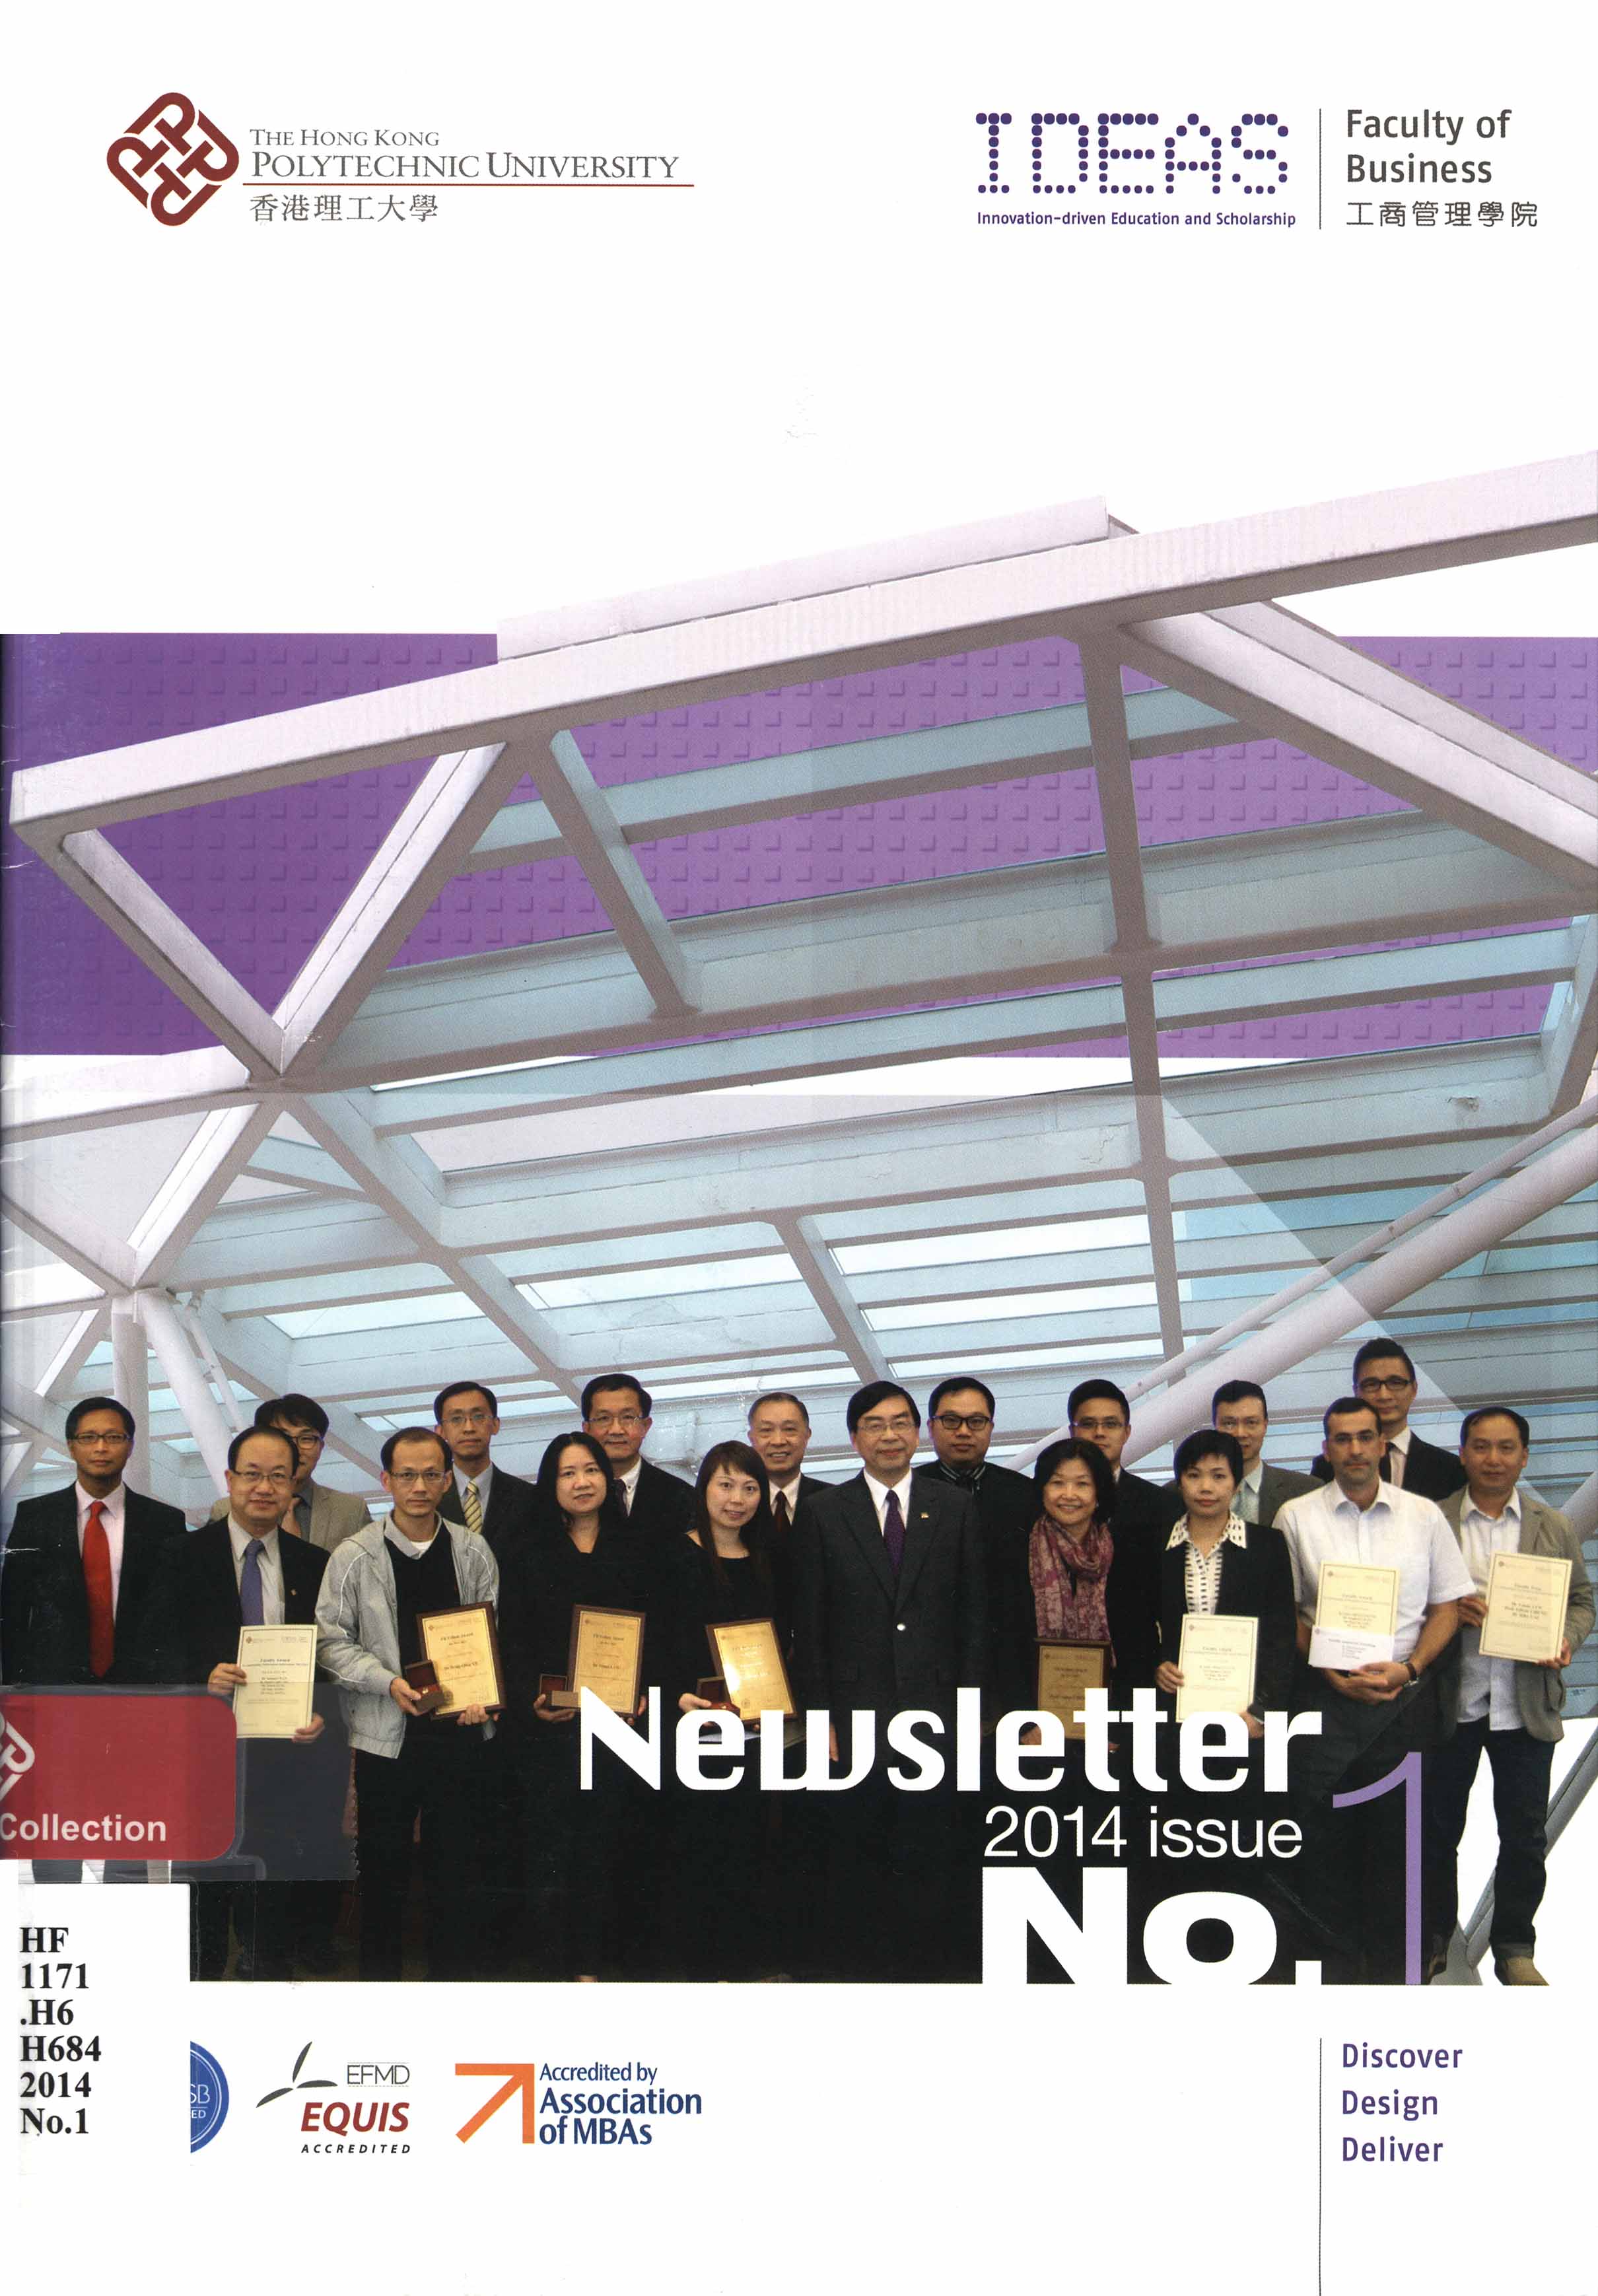 Faculty of Business newsletter. No.1, 2014